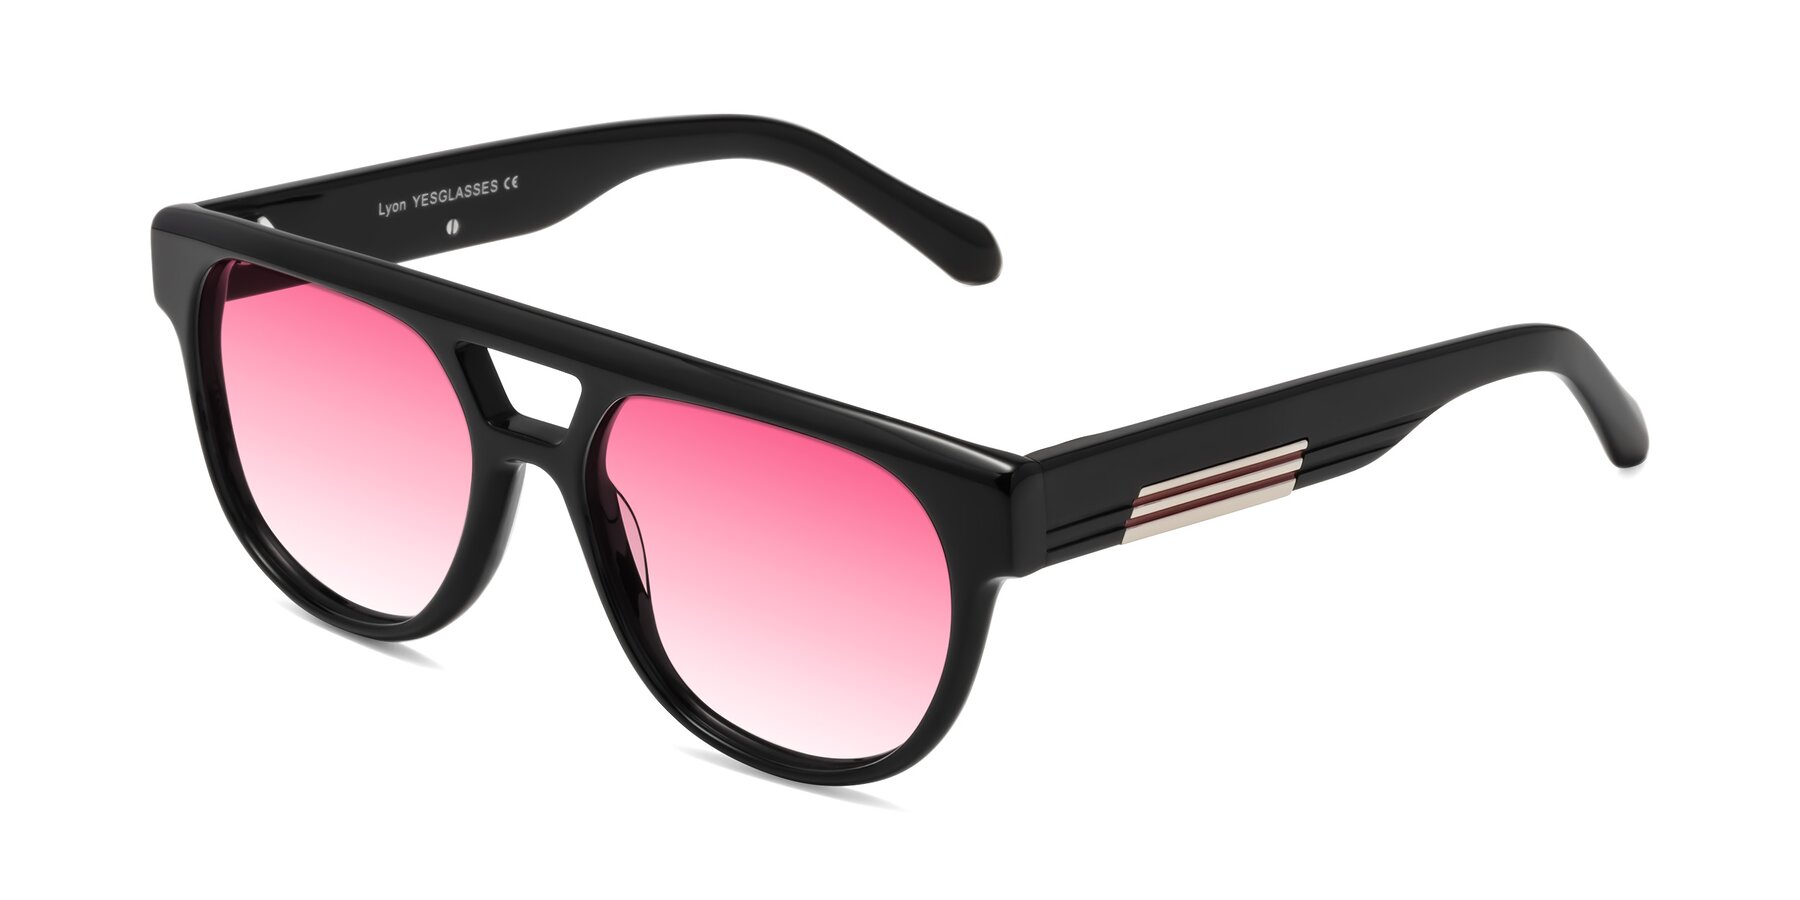 Angle of Lyon in Black with Pink Gradient Lenses